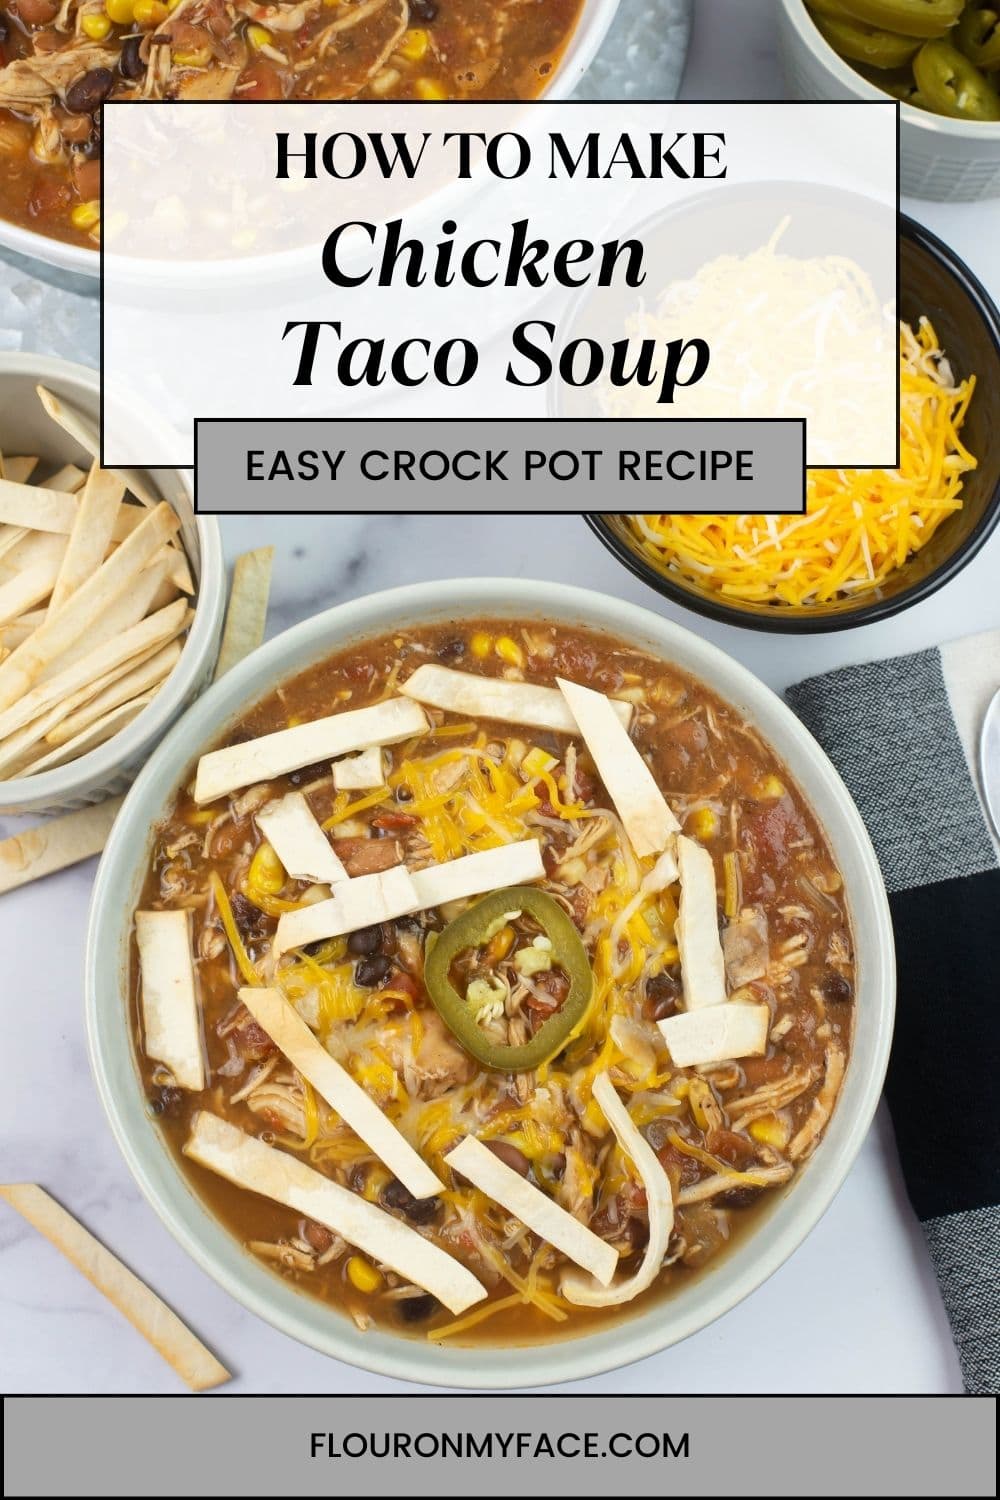 How to make chicken taco soup vertical image.